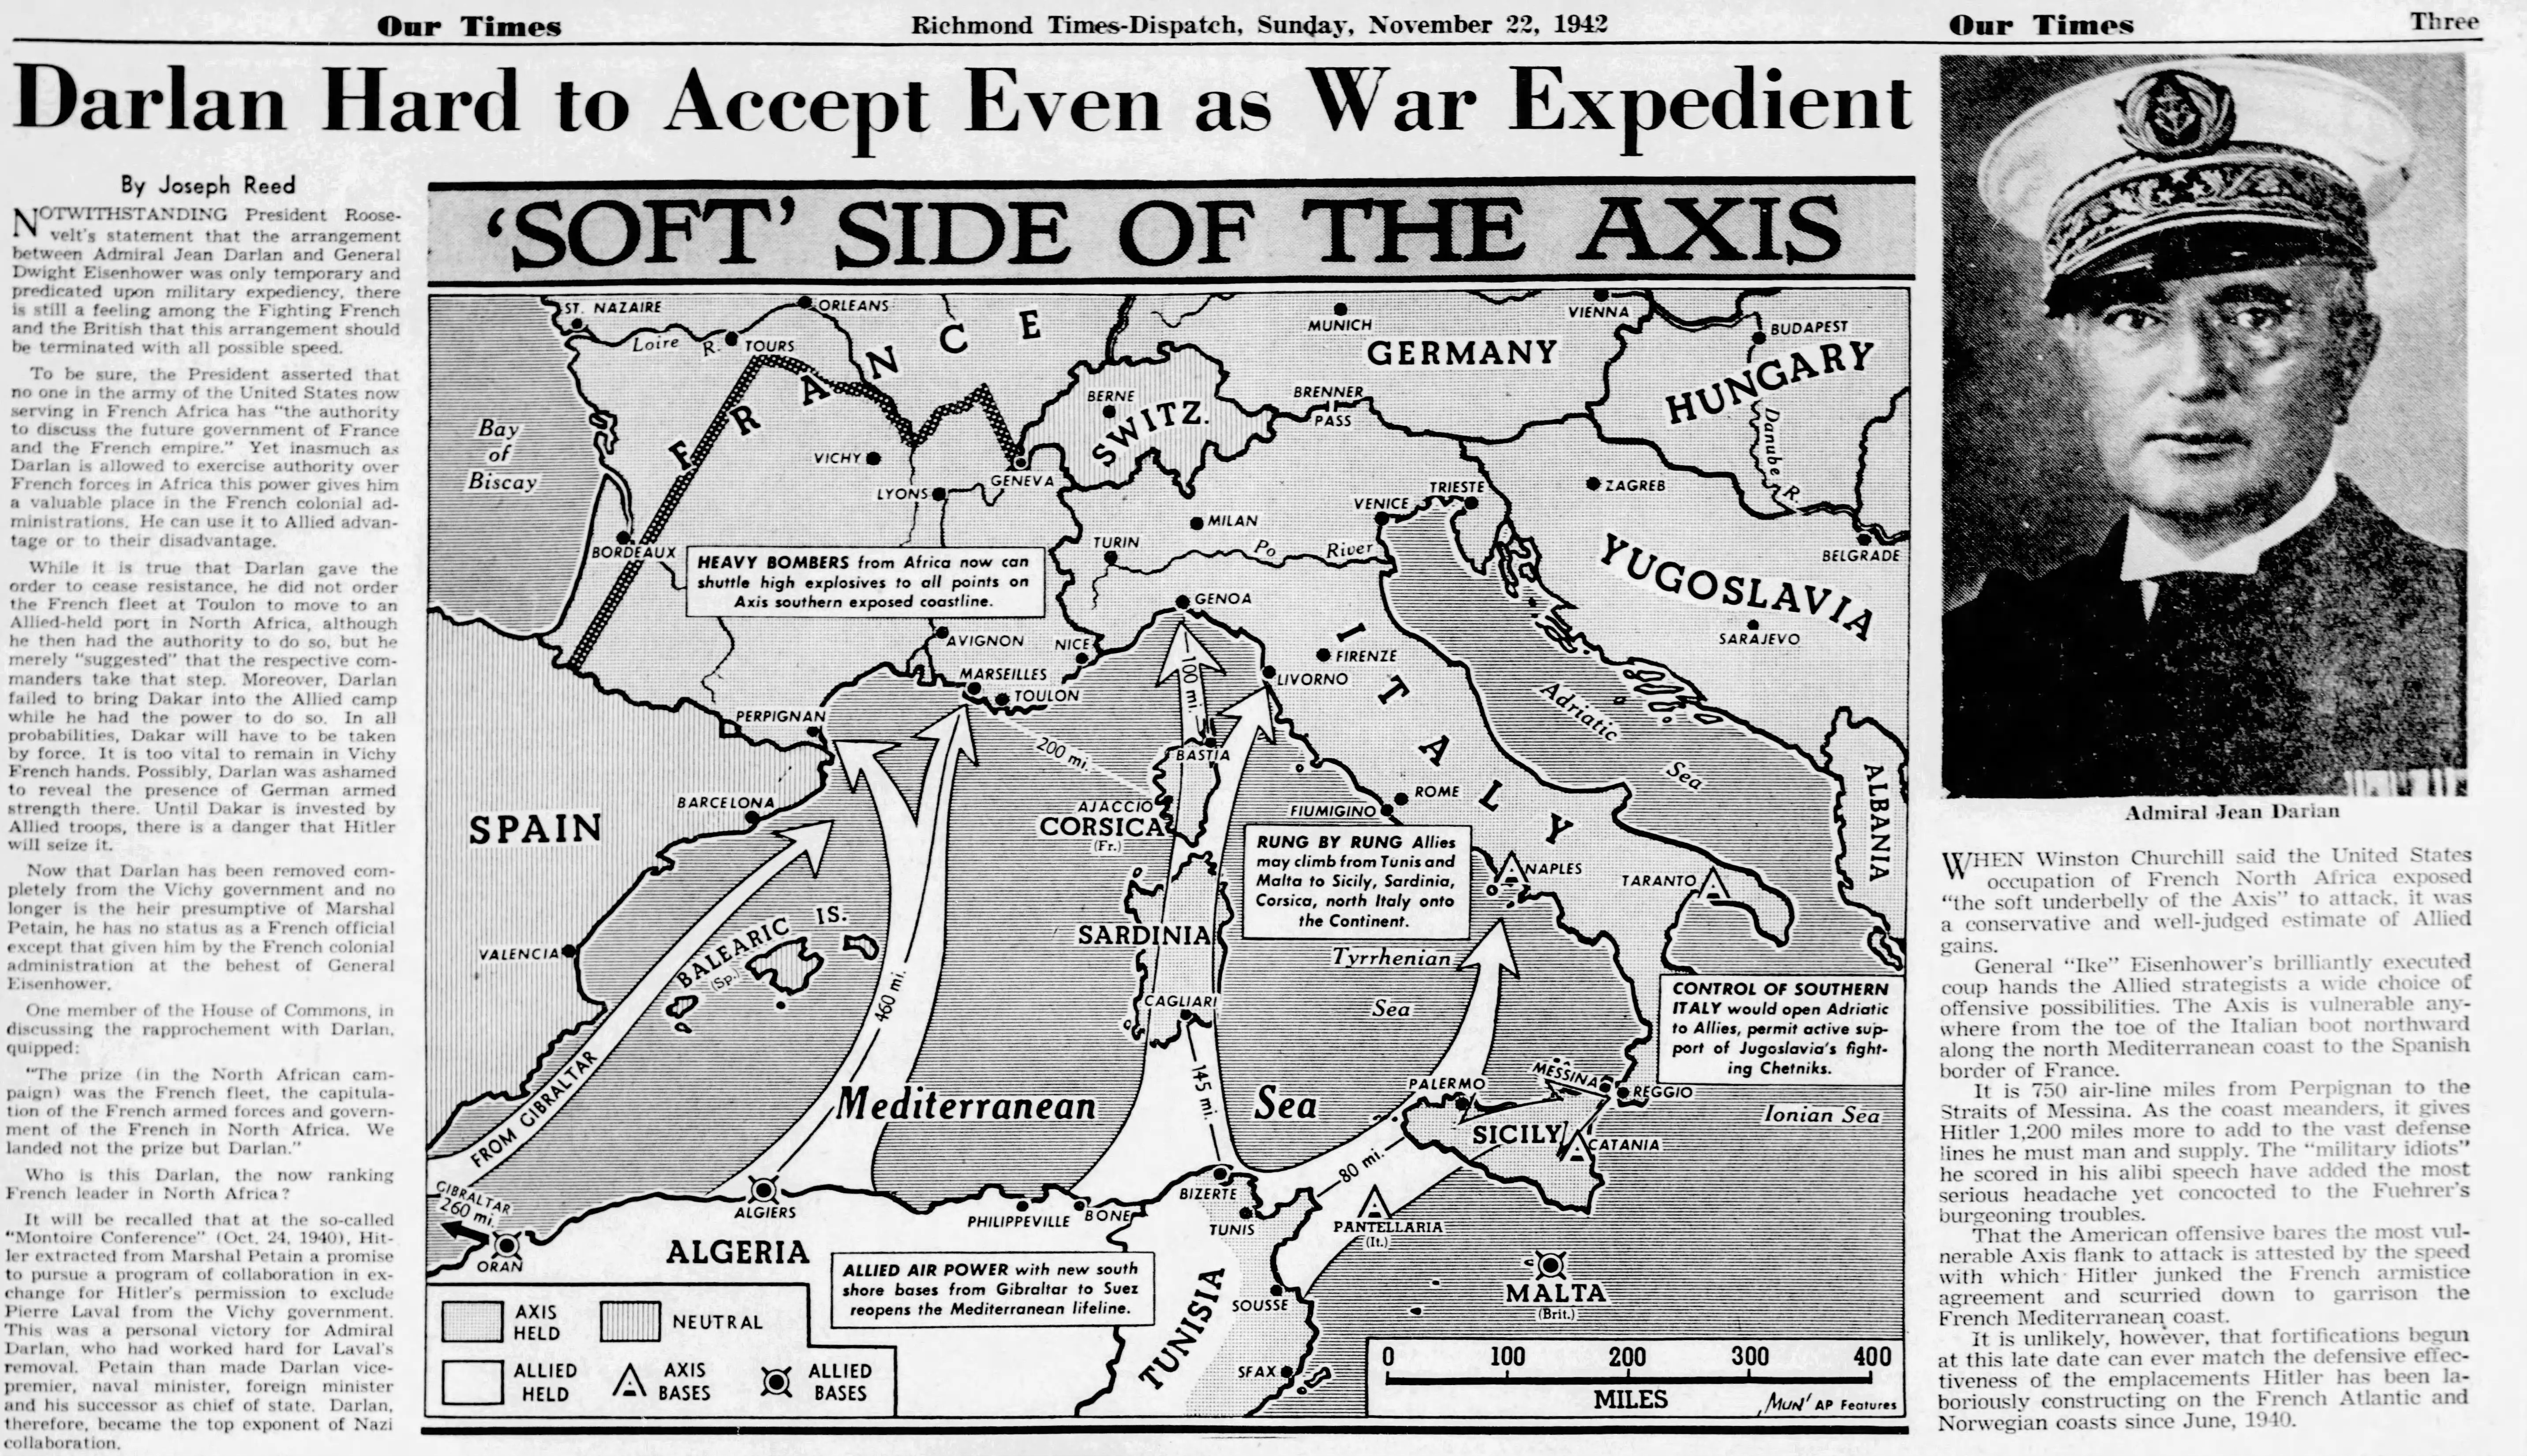 A newspaper article showing a portrait of Admiral Jean (FranÃ§ois) Darlan in uniform on the right, a map of the Western Mediterranean Sea showing potential attack routes from North Africa to Italy and Southern France in the center, and text on the left and right.